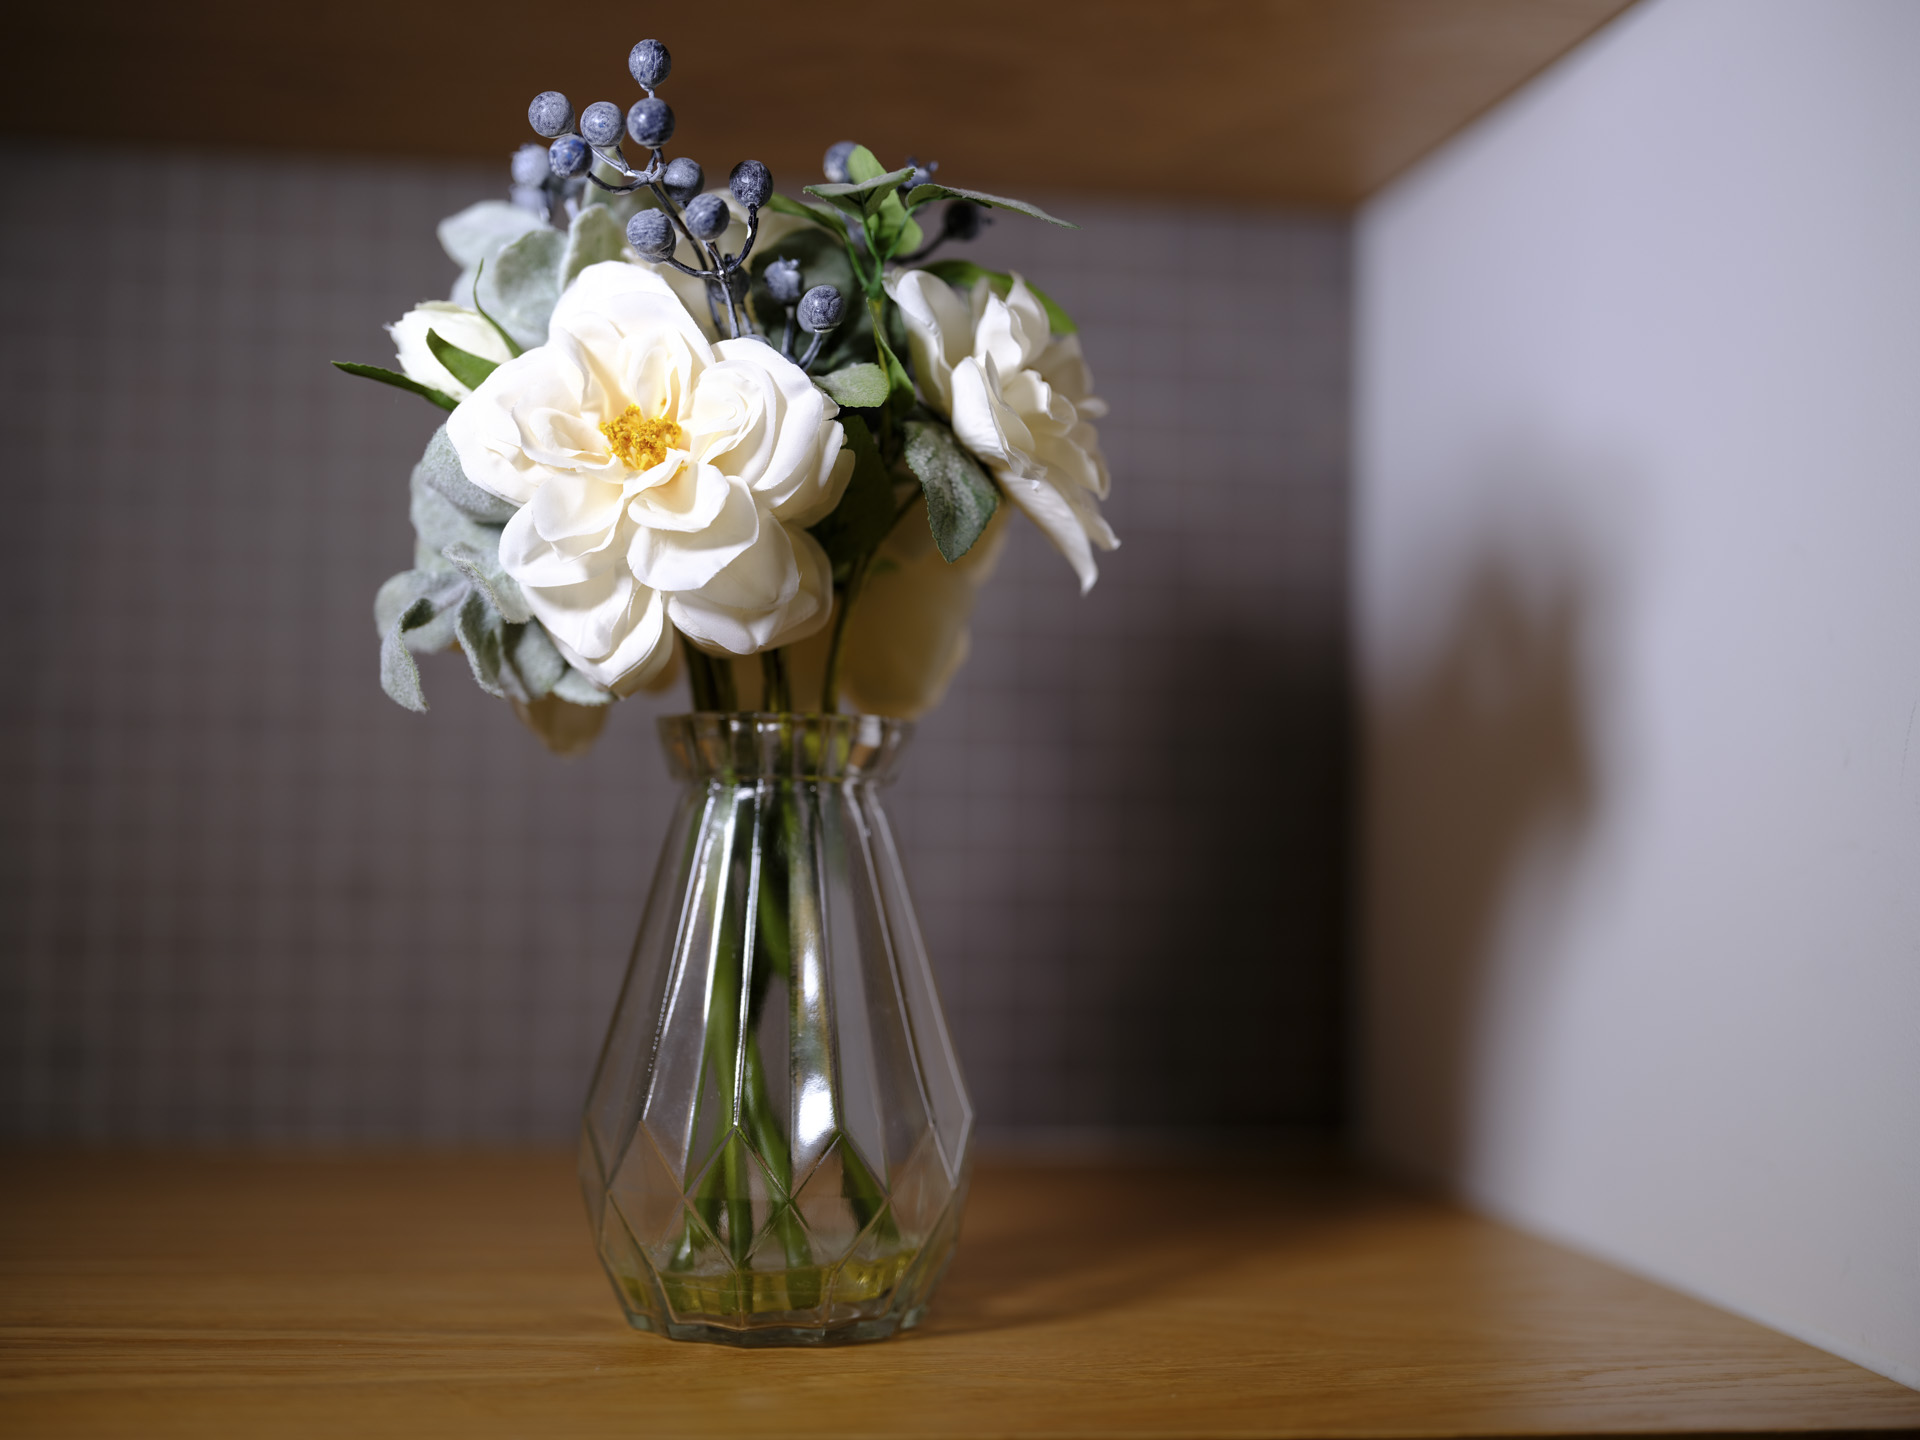 Flowers on a wooden table with standard Fujifilm film simulation